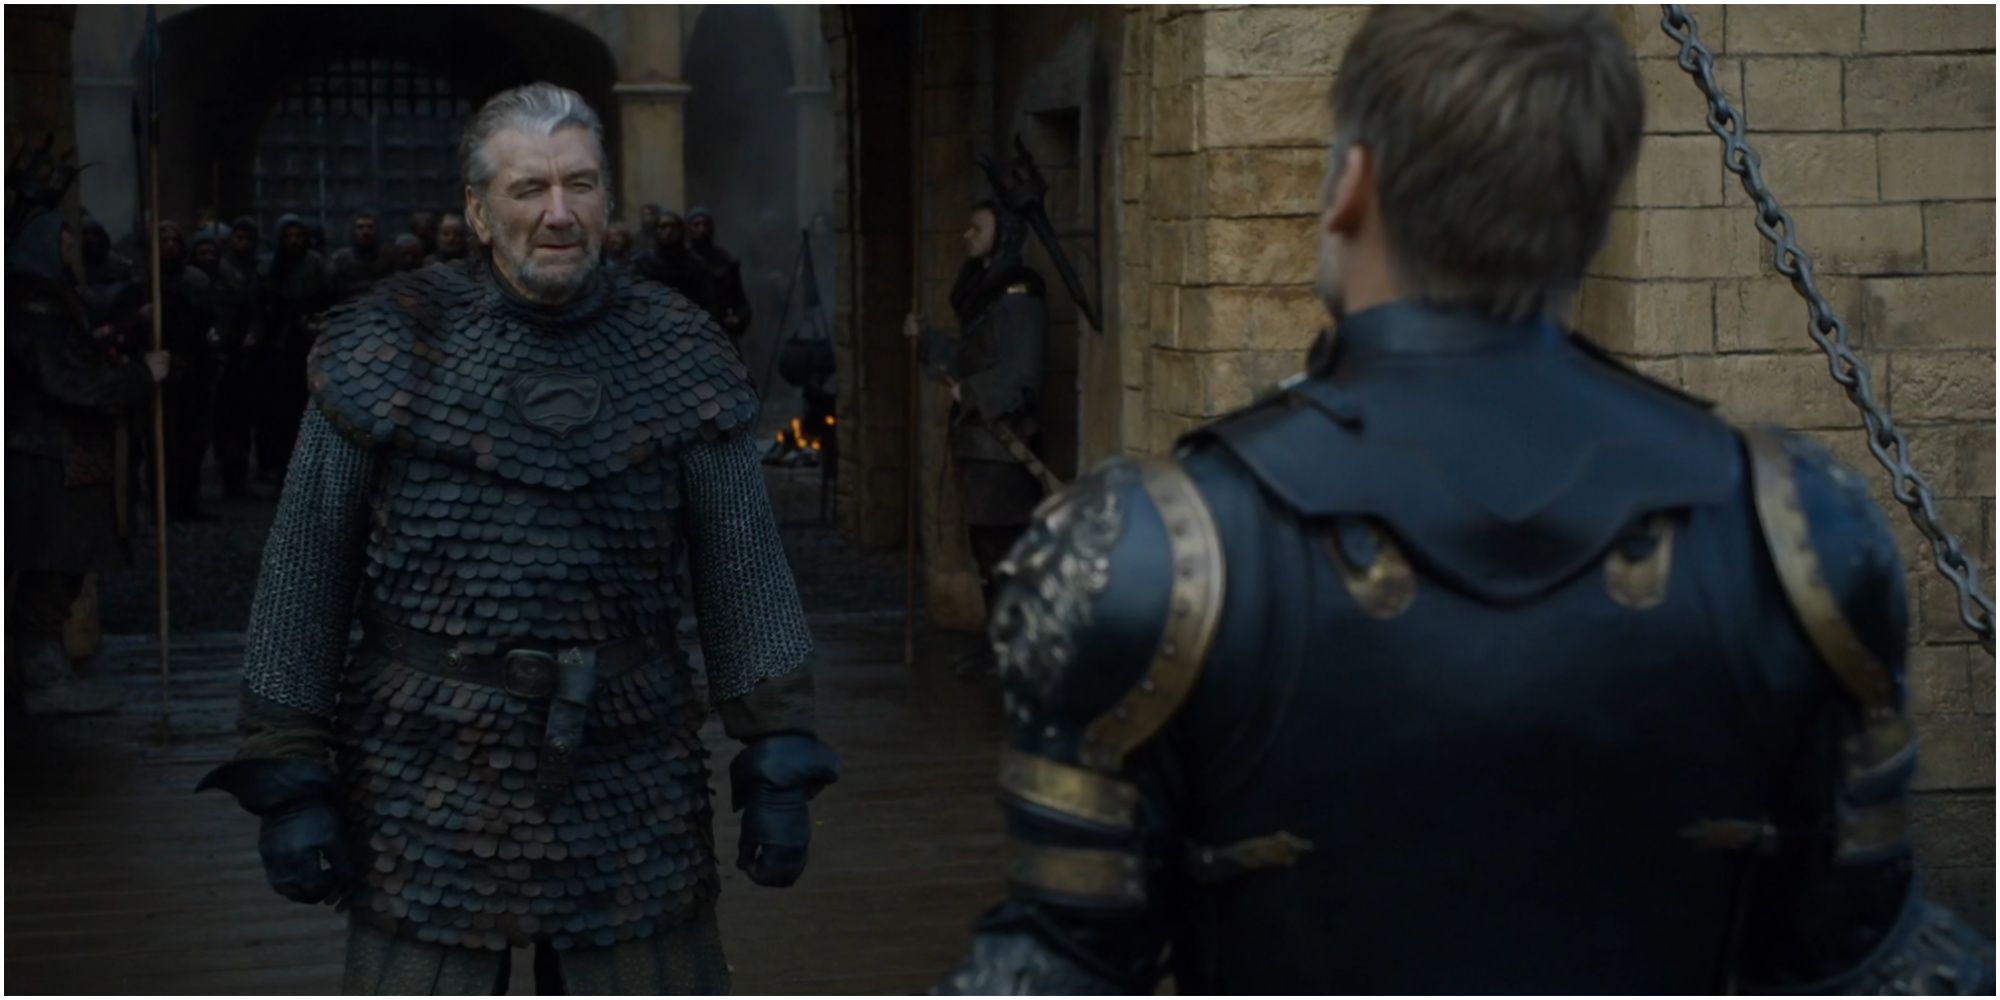 Brynden Tully and Jaime Lannister trade insults in Game of Thrones.